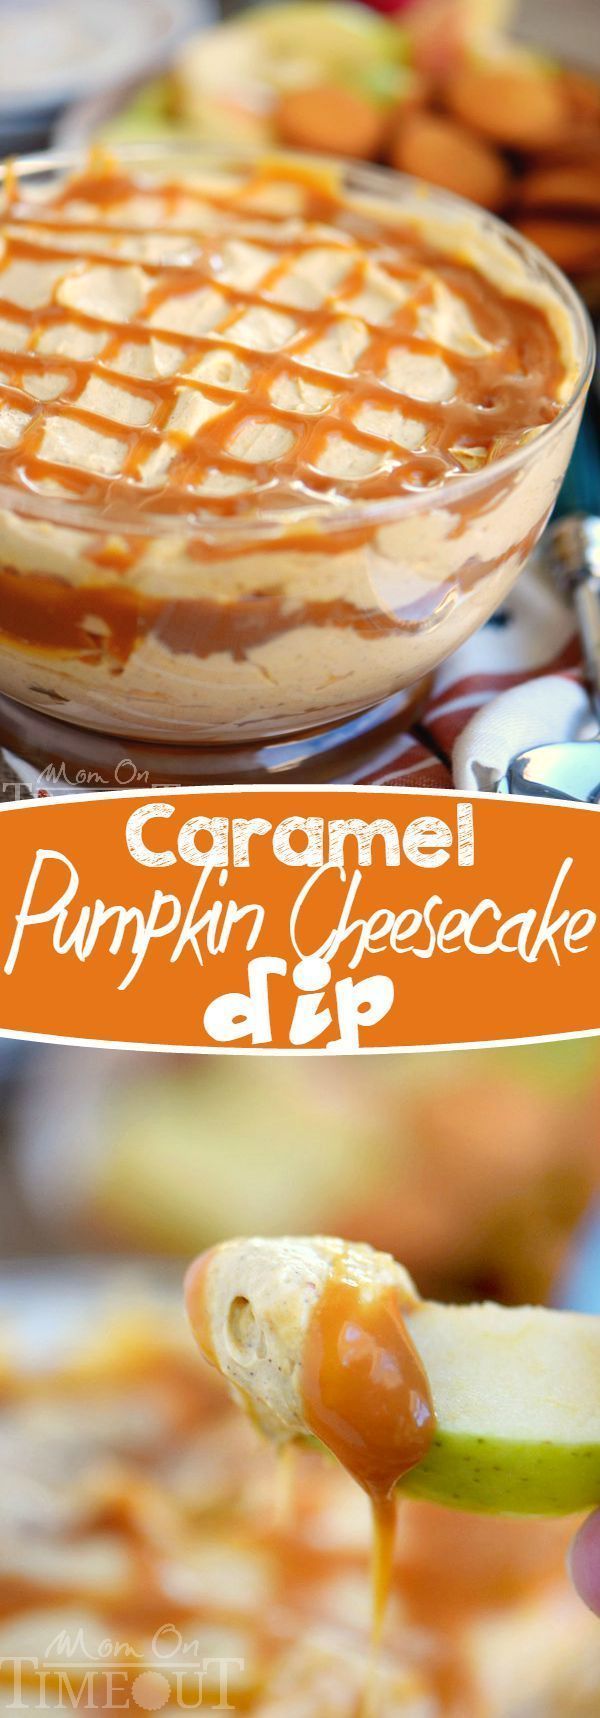 This easy to make, over the top Caramel Pumpkin Cheesecake Dip will have everyone